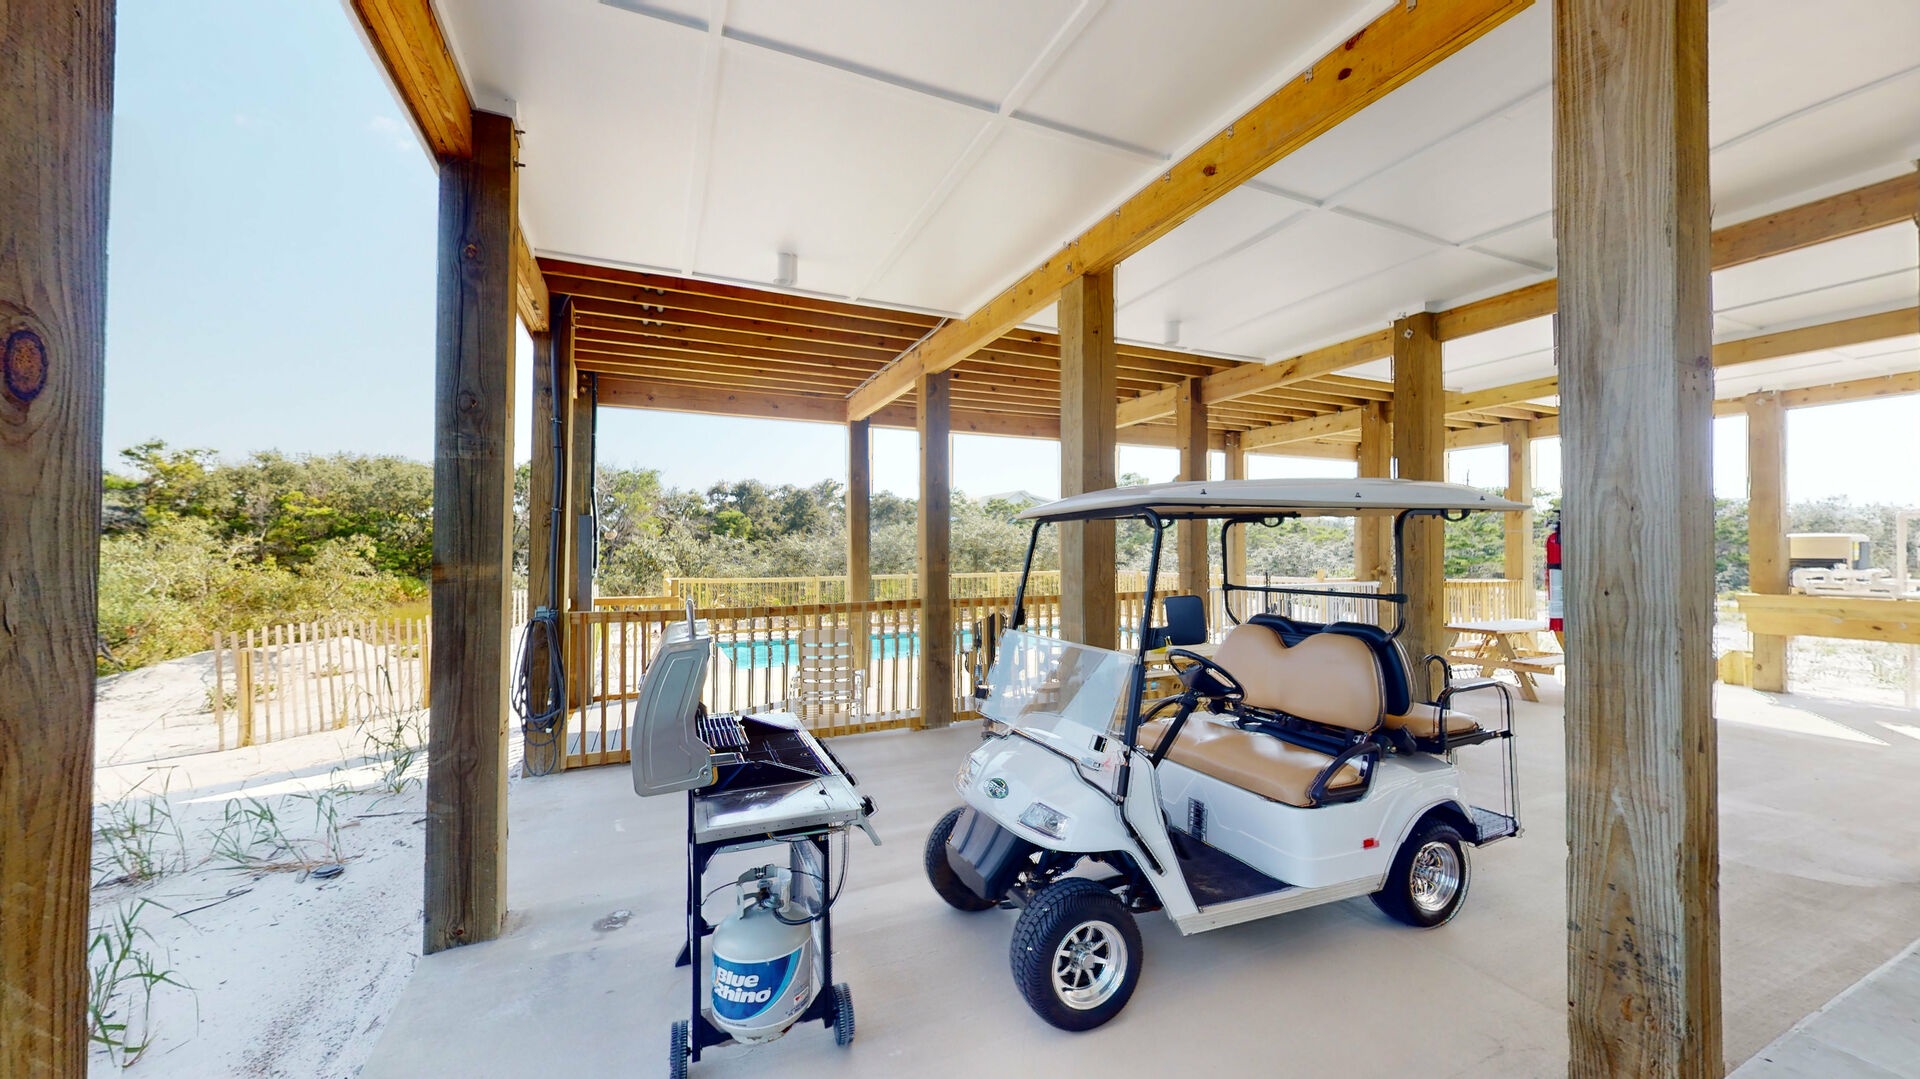 Home features electric car charging,covered dining, gas grill, golf cart storage and giant chess game